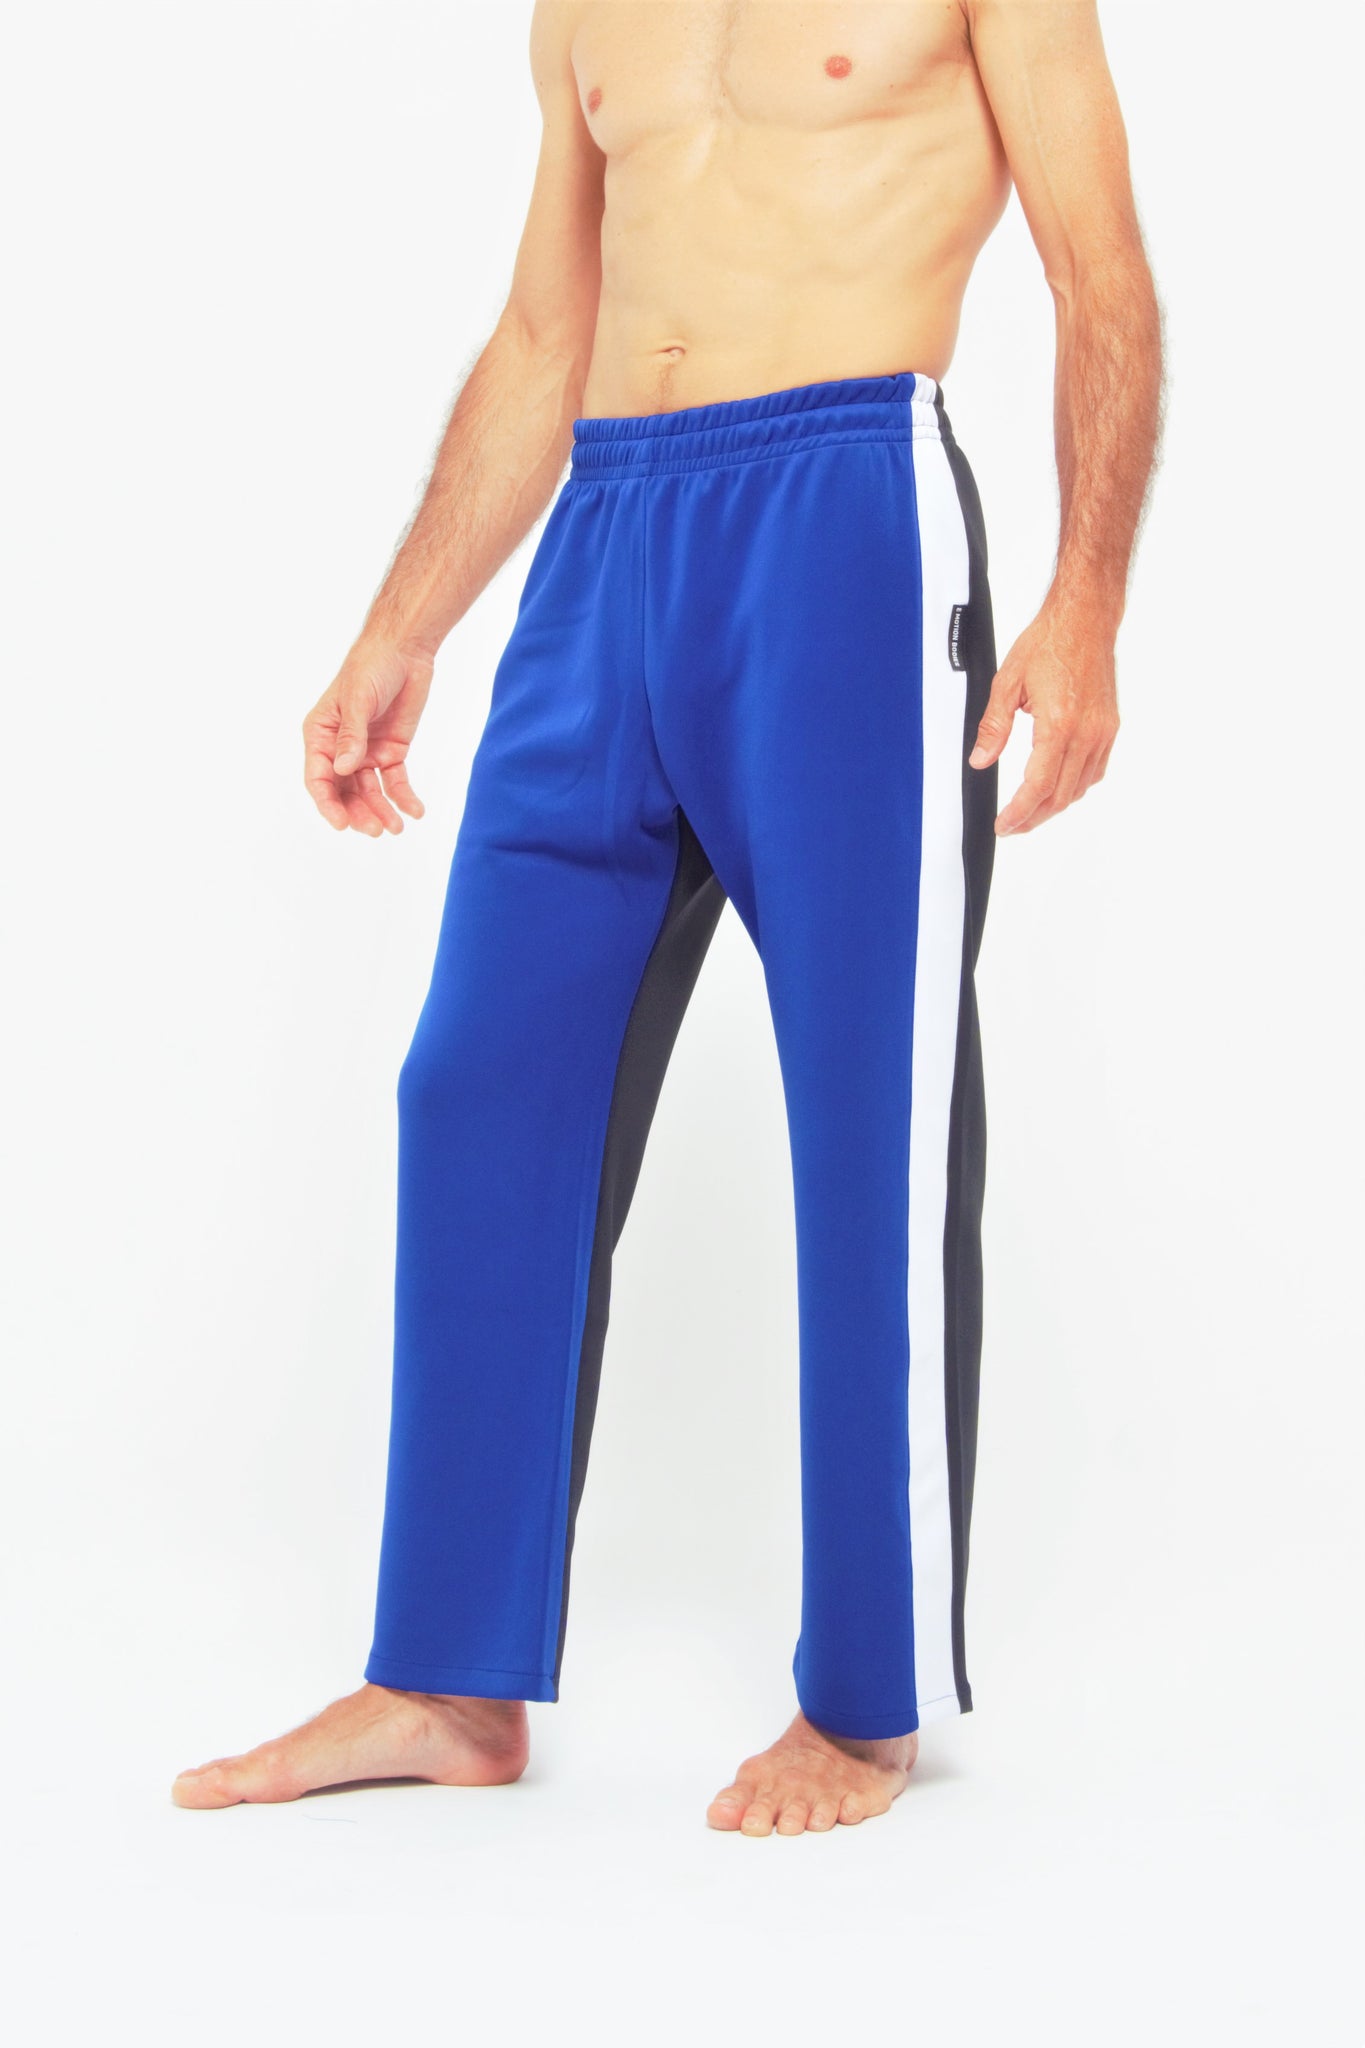 Flying Contemporary Dance Pants - Blue & Red / EMotionBodiesBrand – E  Motion Bodies Brand